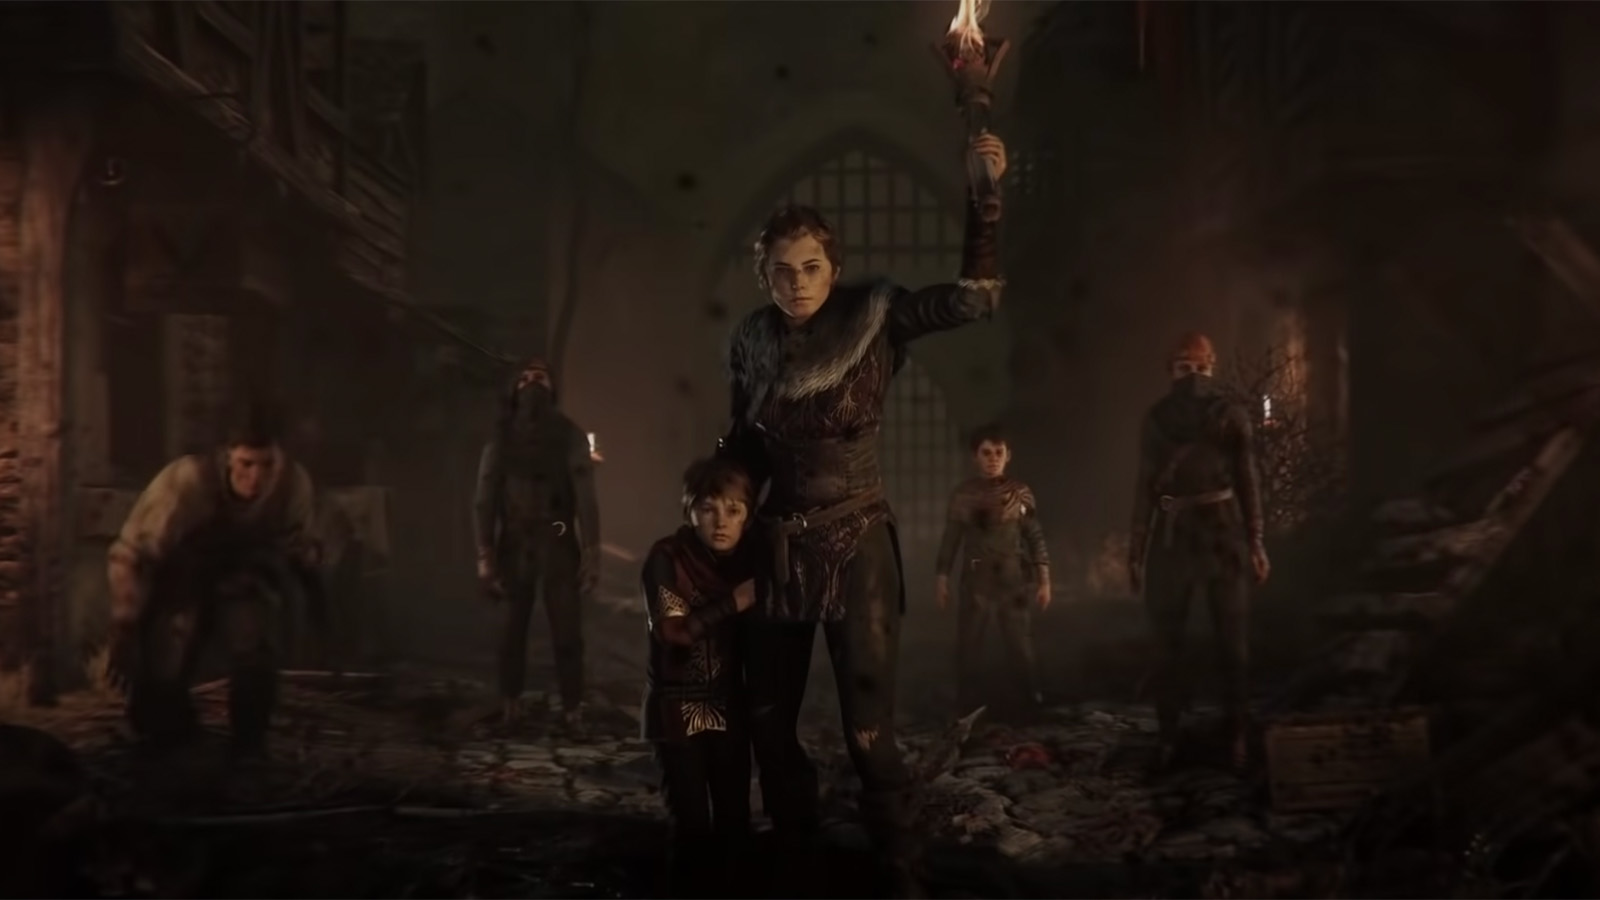 Guide for A Plague Tale: Innocence - Chapter 3 - Retribution